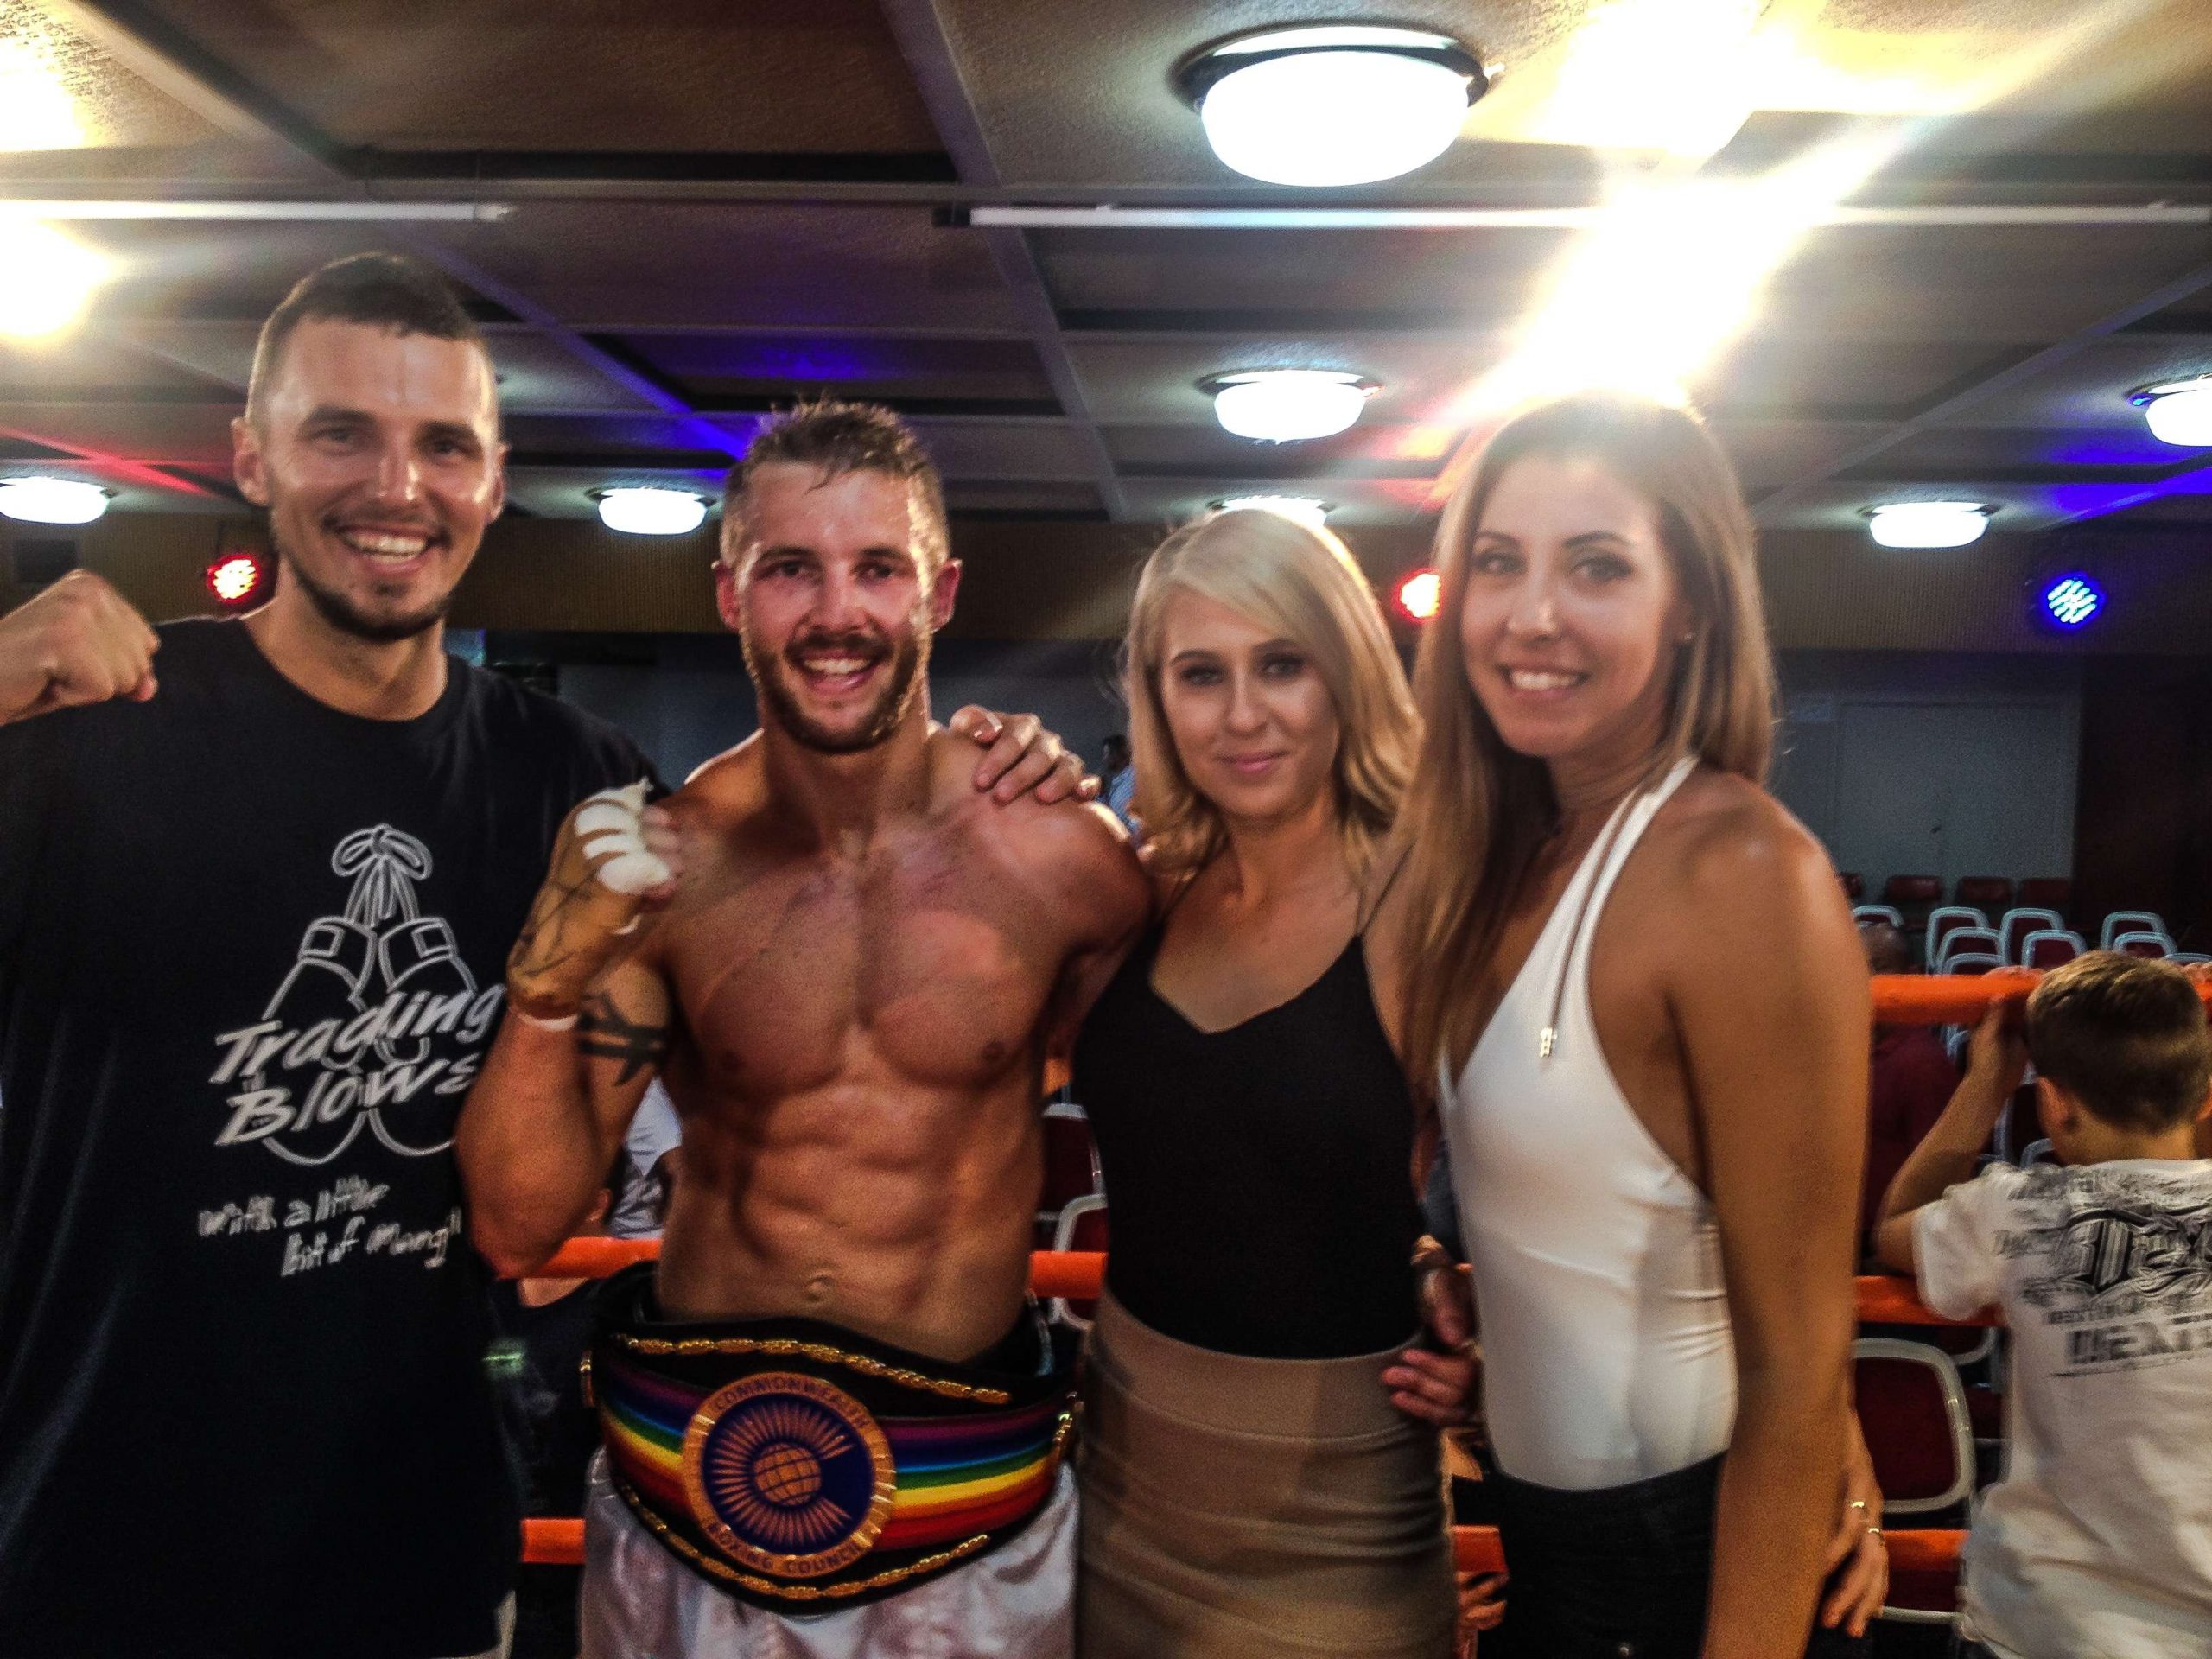 Carl Jocumsen poses with his cousin, Kris George. George is the Commonwealth Boxing Council welterweight champion. The cousinâs girlfriends join them, including Kayla Palaniuk. 